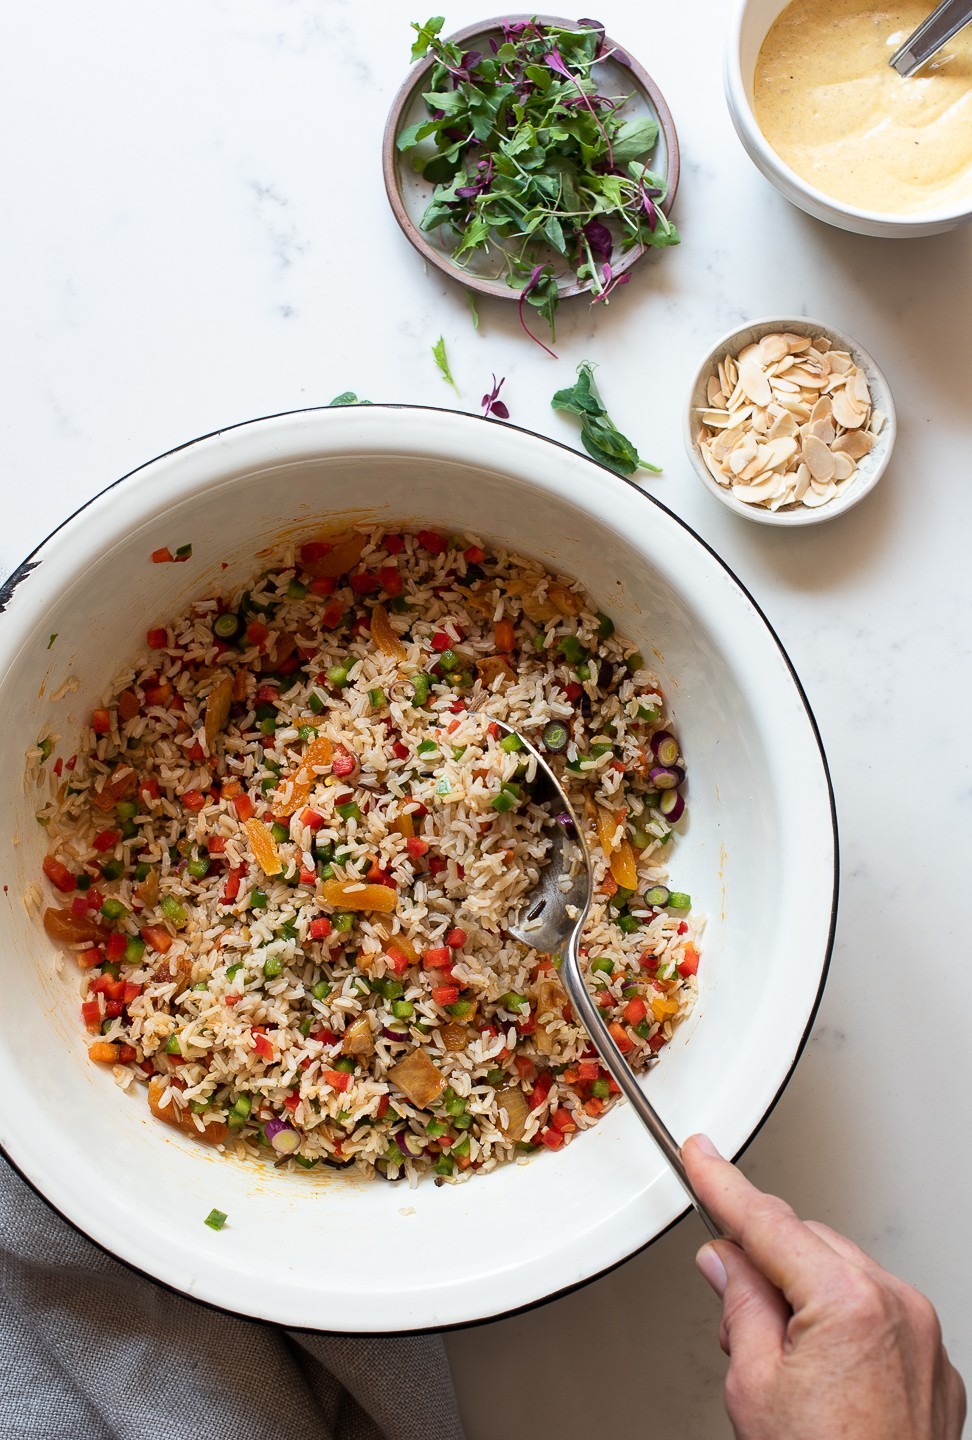 Wild rice salad with sweet peppers